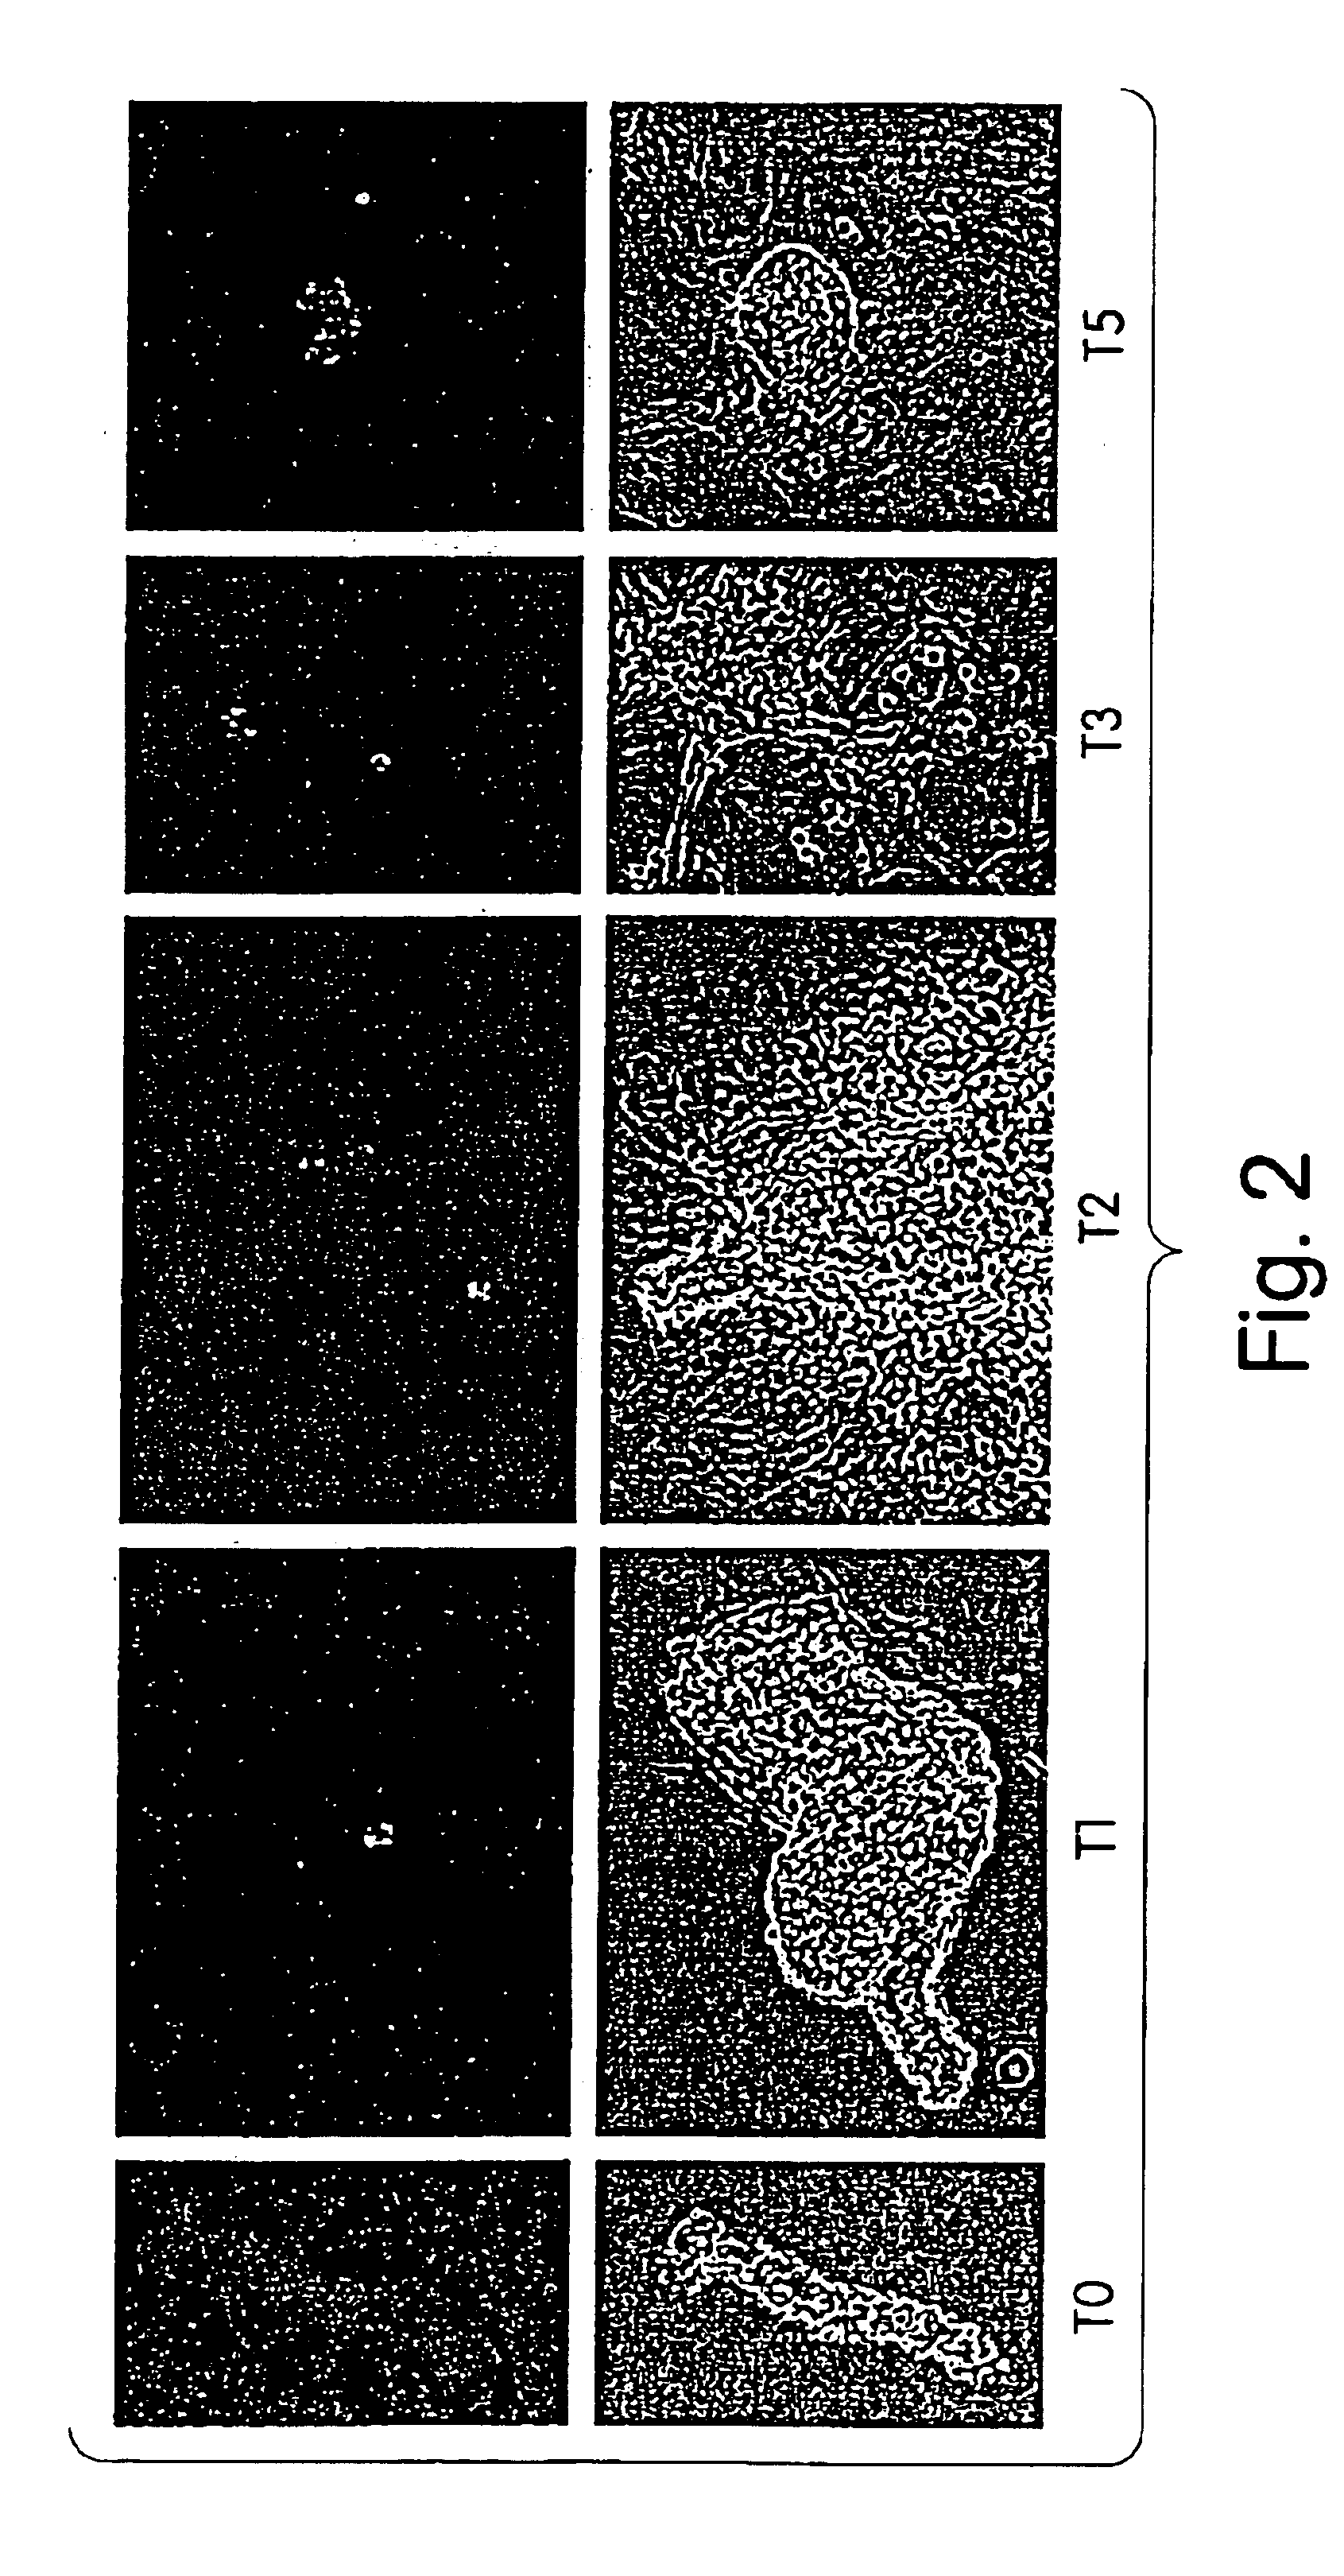 Progenitor cells, methods and uses related thereto